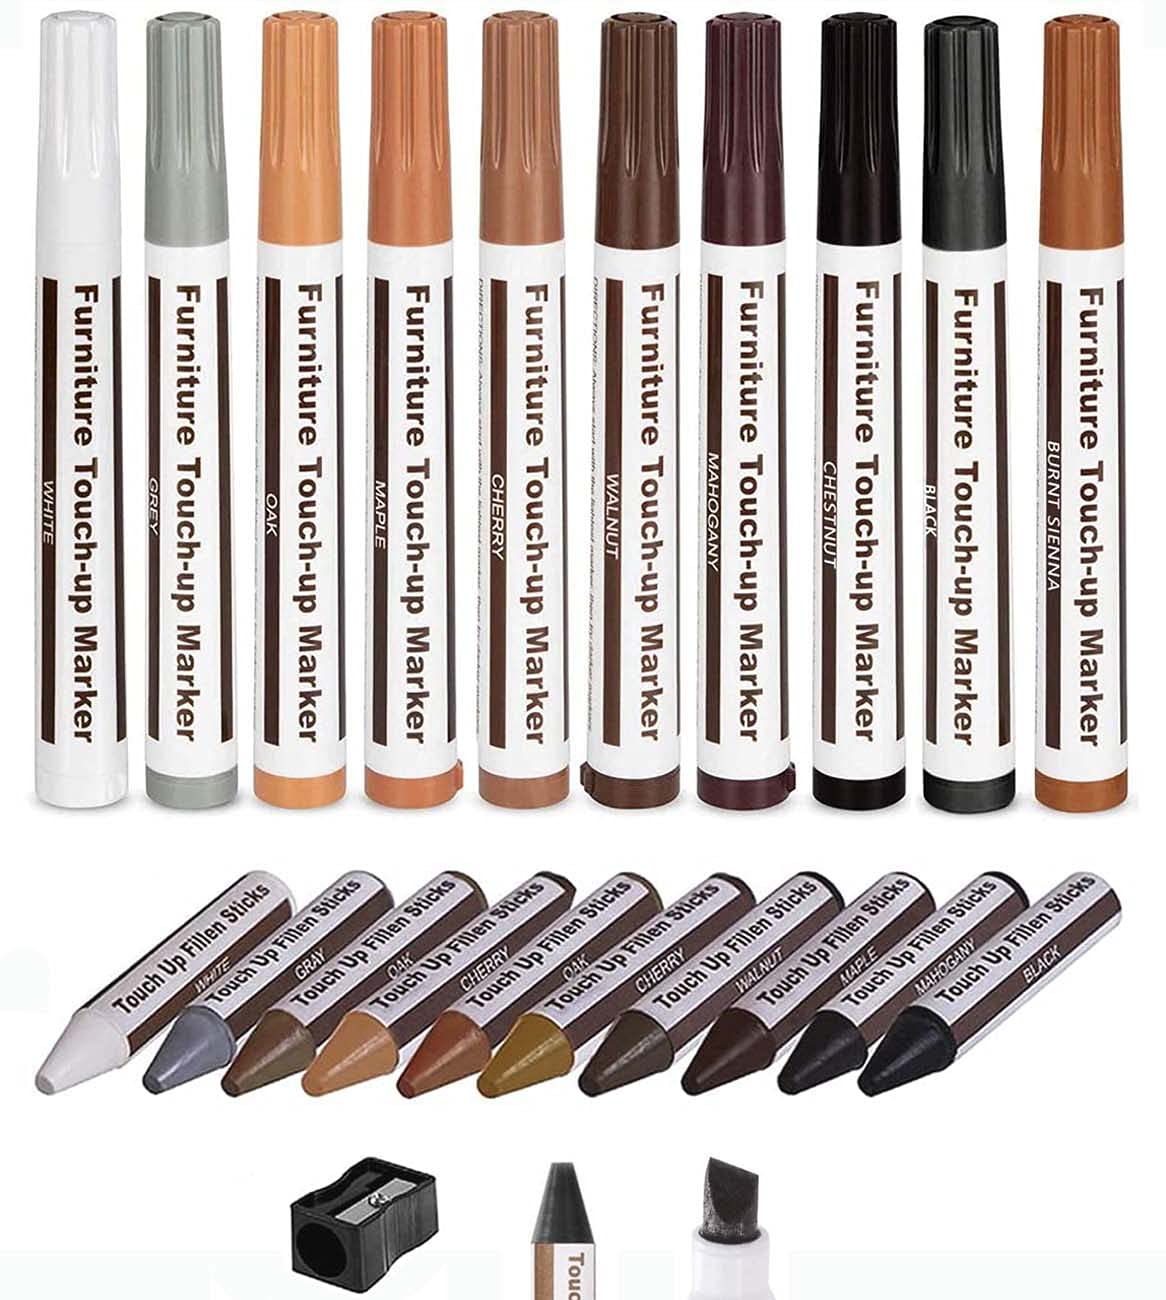 Wood Touch Up Markers for Furniture & Woodwork Repair